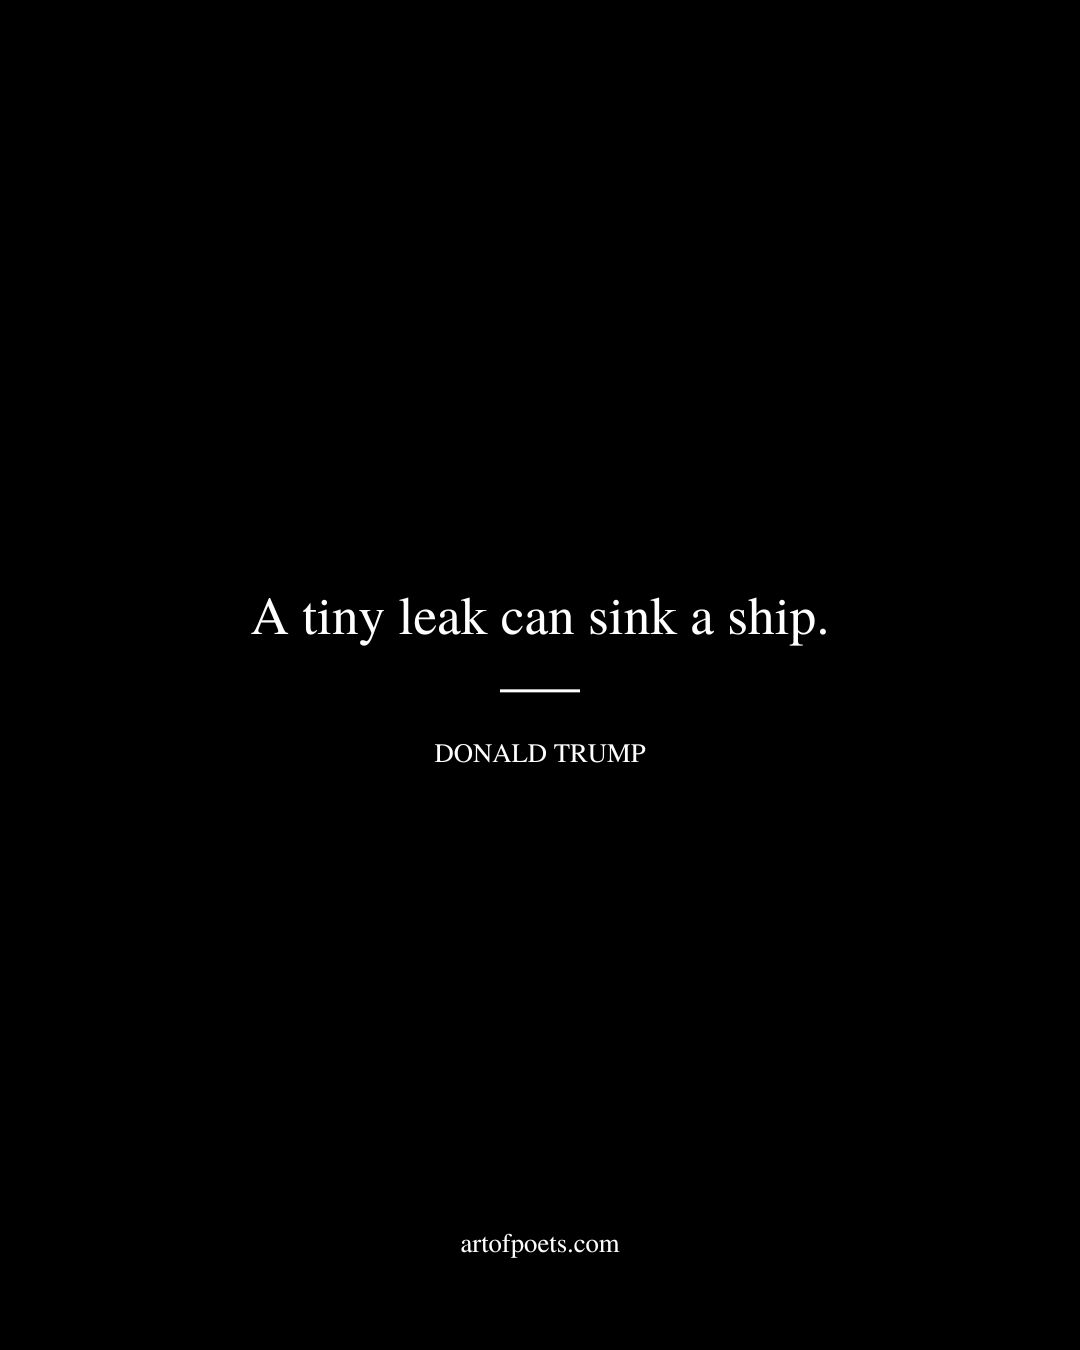 A tiny leak can sink a ship